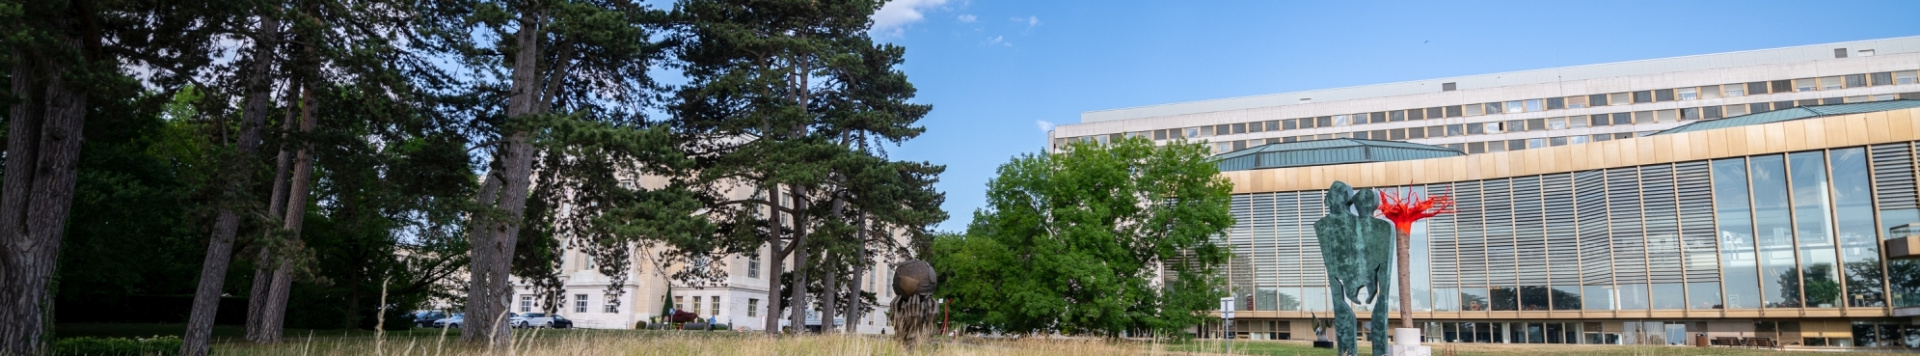 A panoramic view of one of the buildings inside the Palais des Nations next to some trees and behind some artwork. 